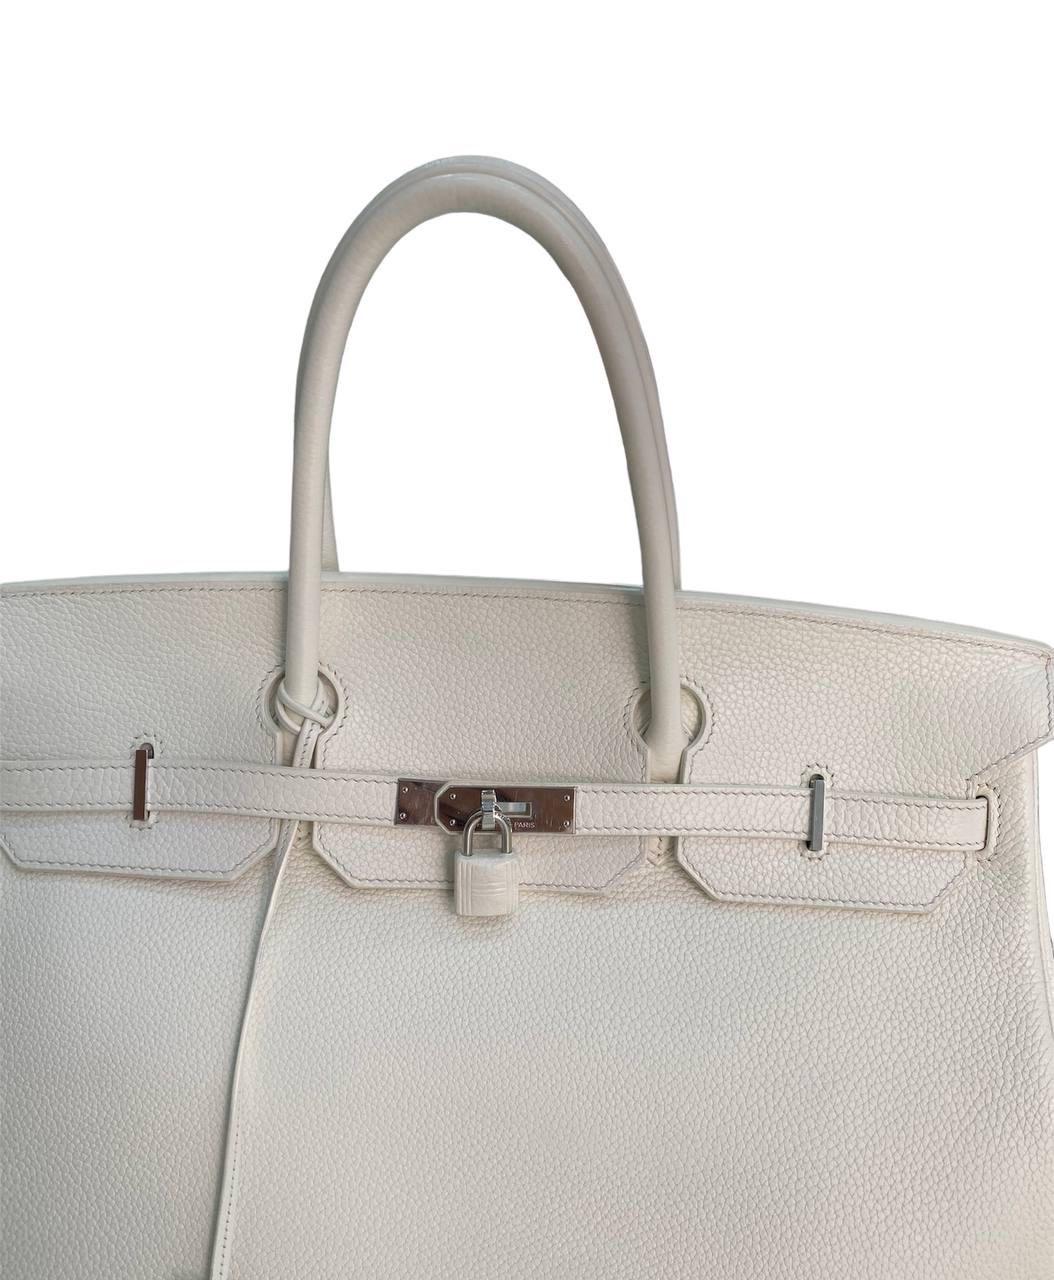 2011 Hermès Birkin 40 White Clemence Leather Top Handle Bag  For Sale 7